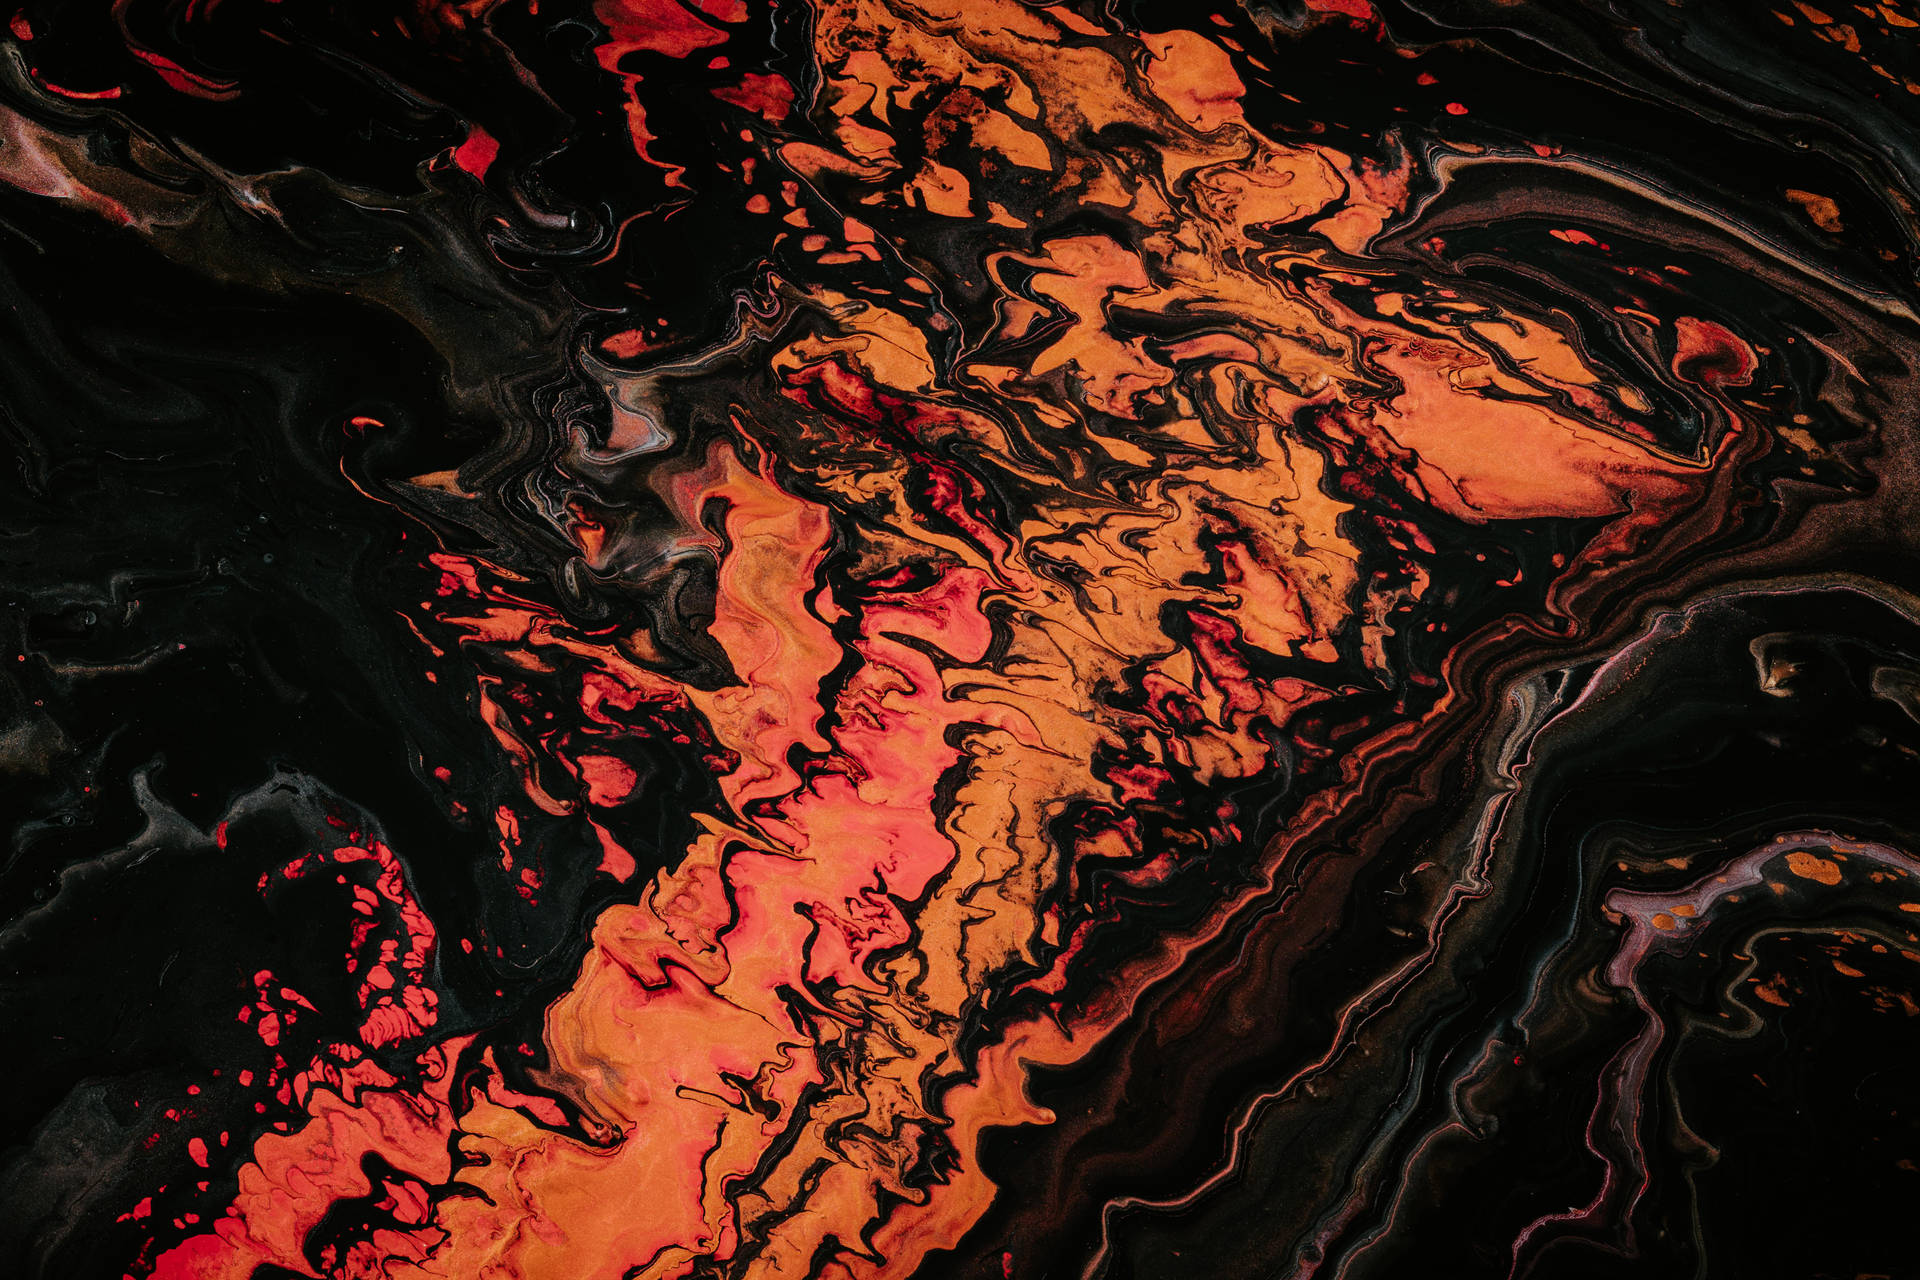 Organic Fluid Curving Dark Abstract Background